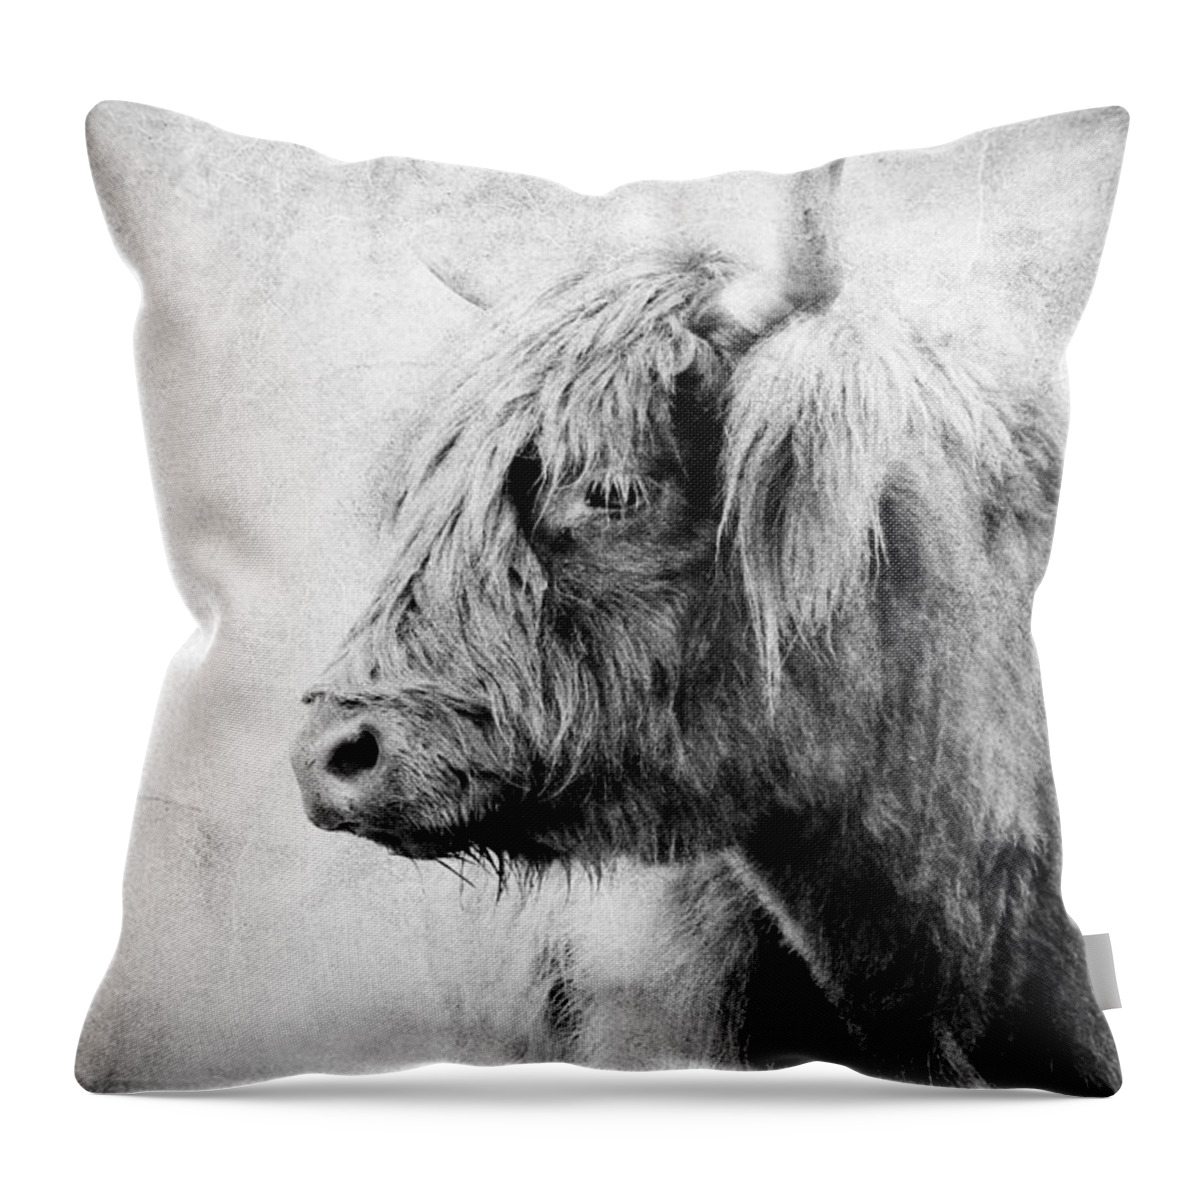 Scottish Highland Cattle Throw Pillow featuring the photograph Black And White Highlander Cow by Athena Mckinzie